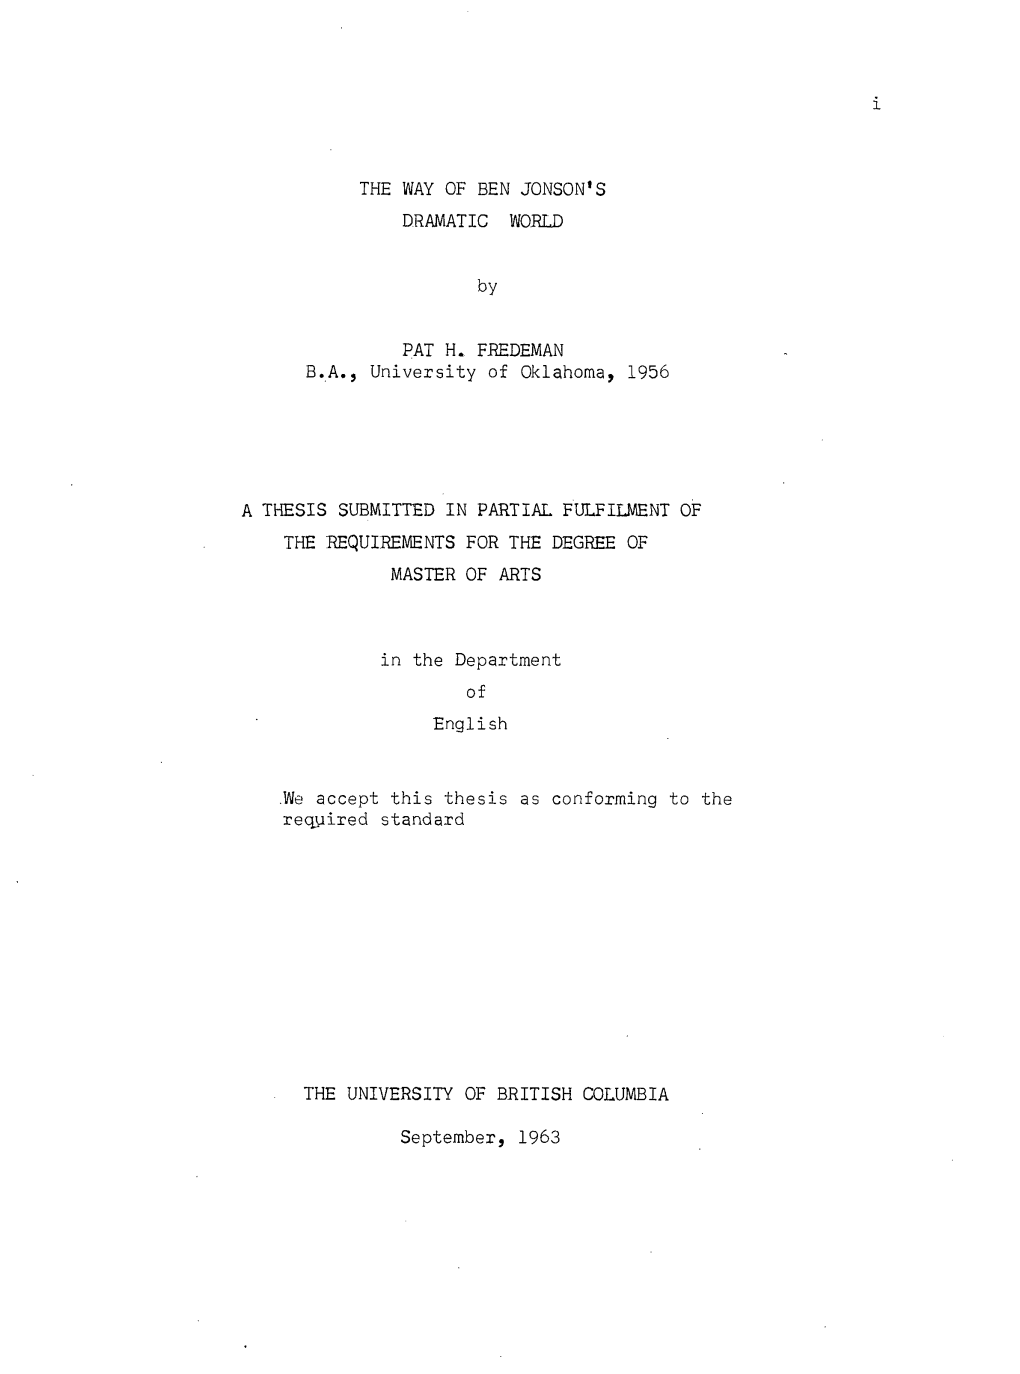 I the WAY of BEN JONSON's DRAMATIC WORLD by PAT H. FREDEMAN B.A., University of Oklahoma, 1956 a THESIS SUBMITTED in PARTIAL